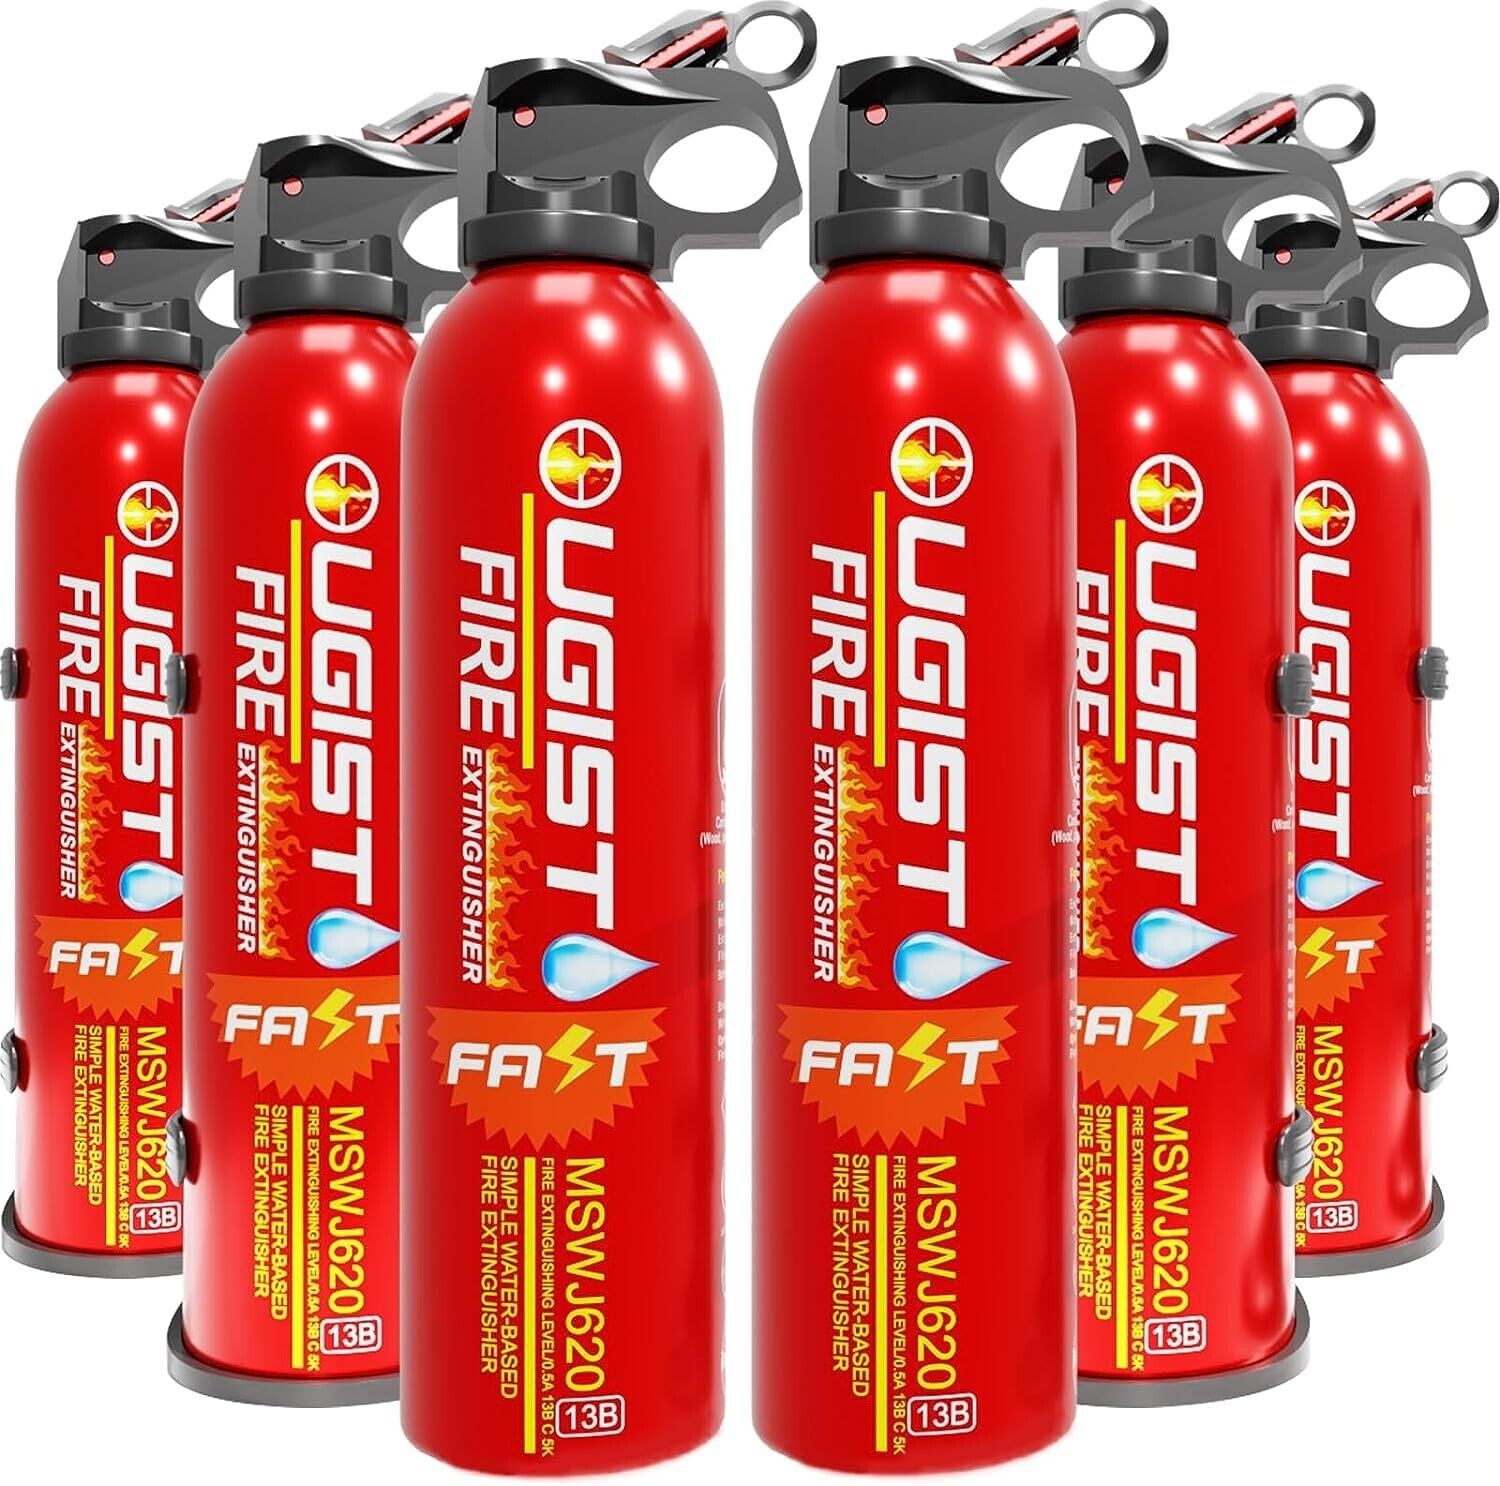 Ougist Fire Extinguishers for Home Effective for Preventing Re-ignition 6Pcs